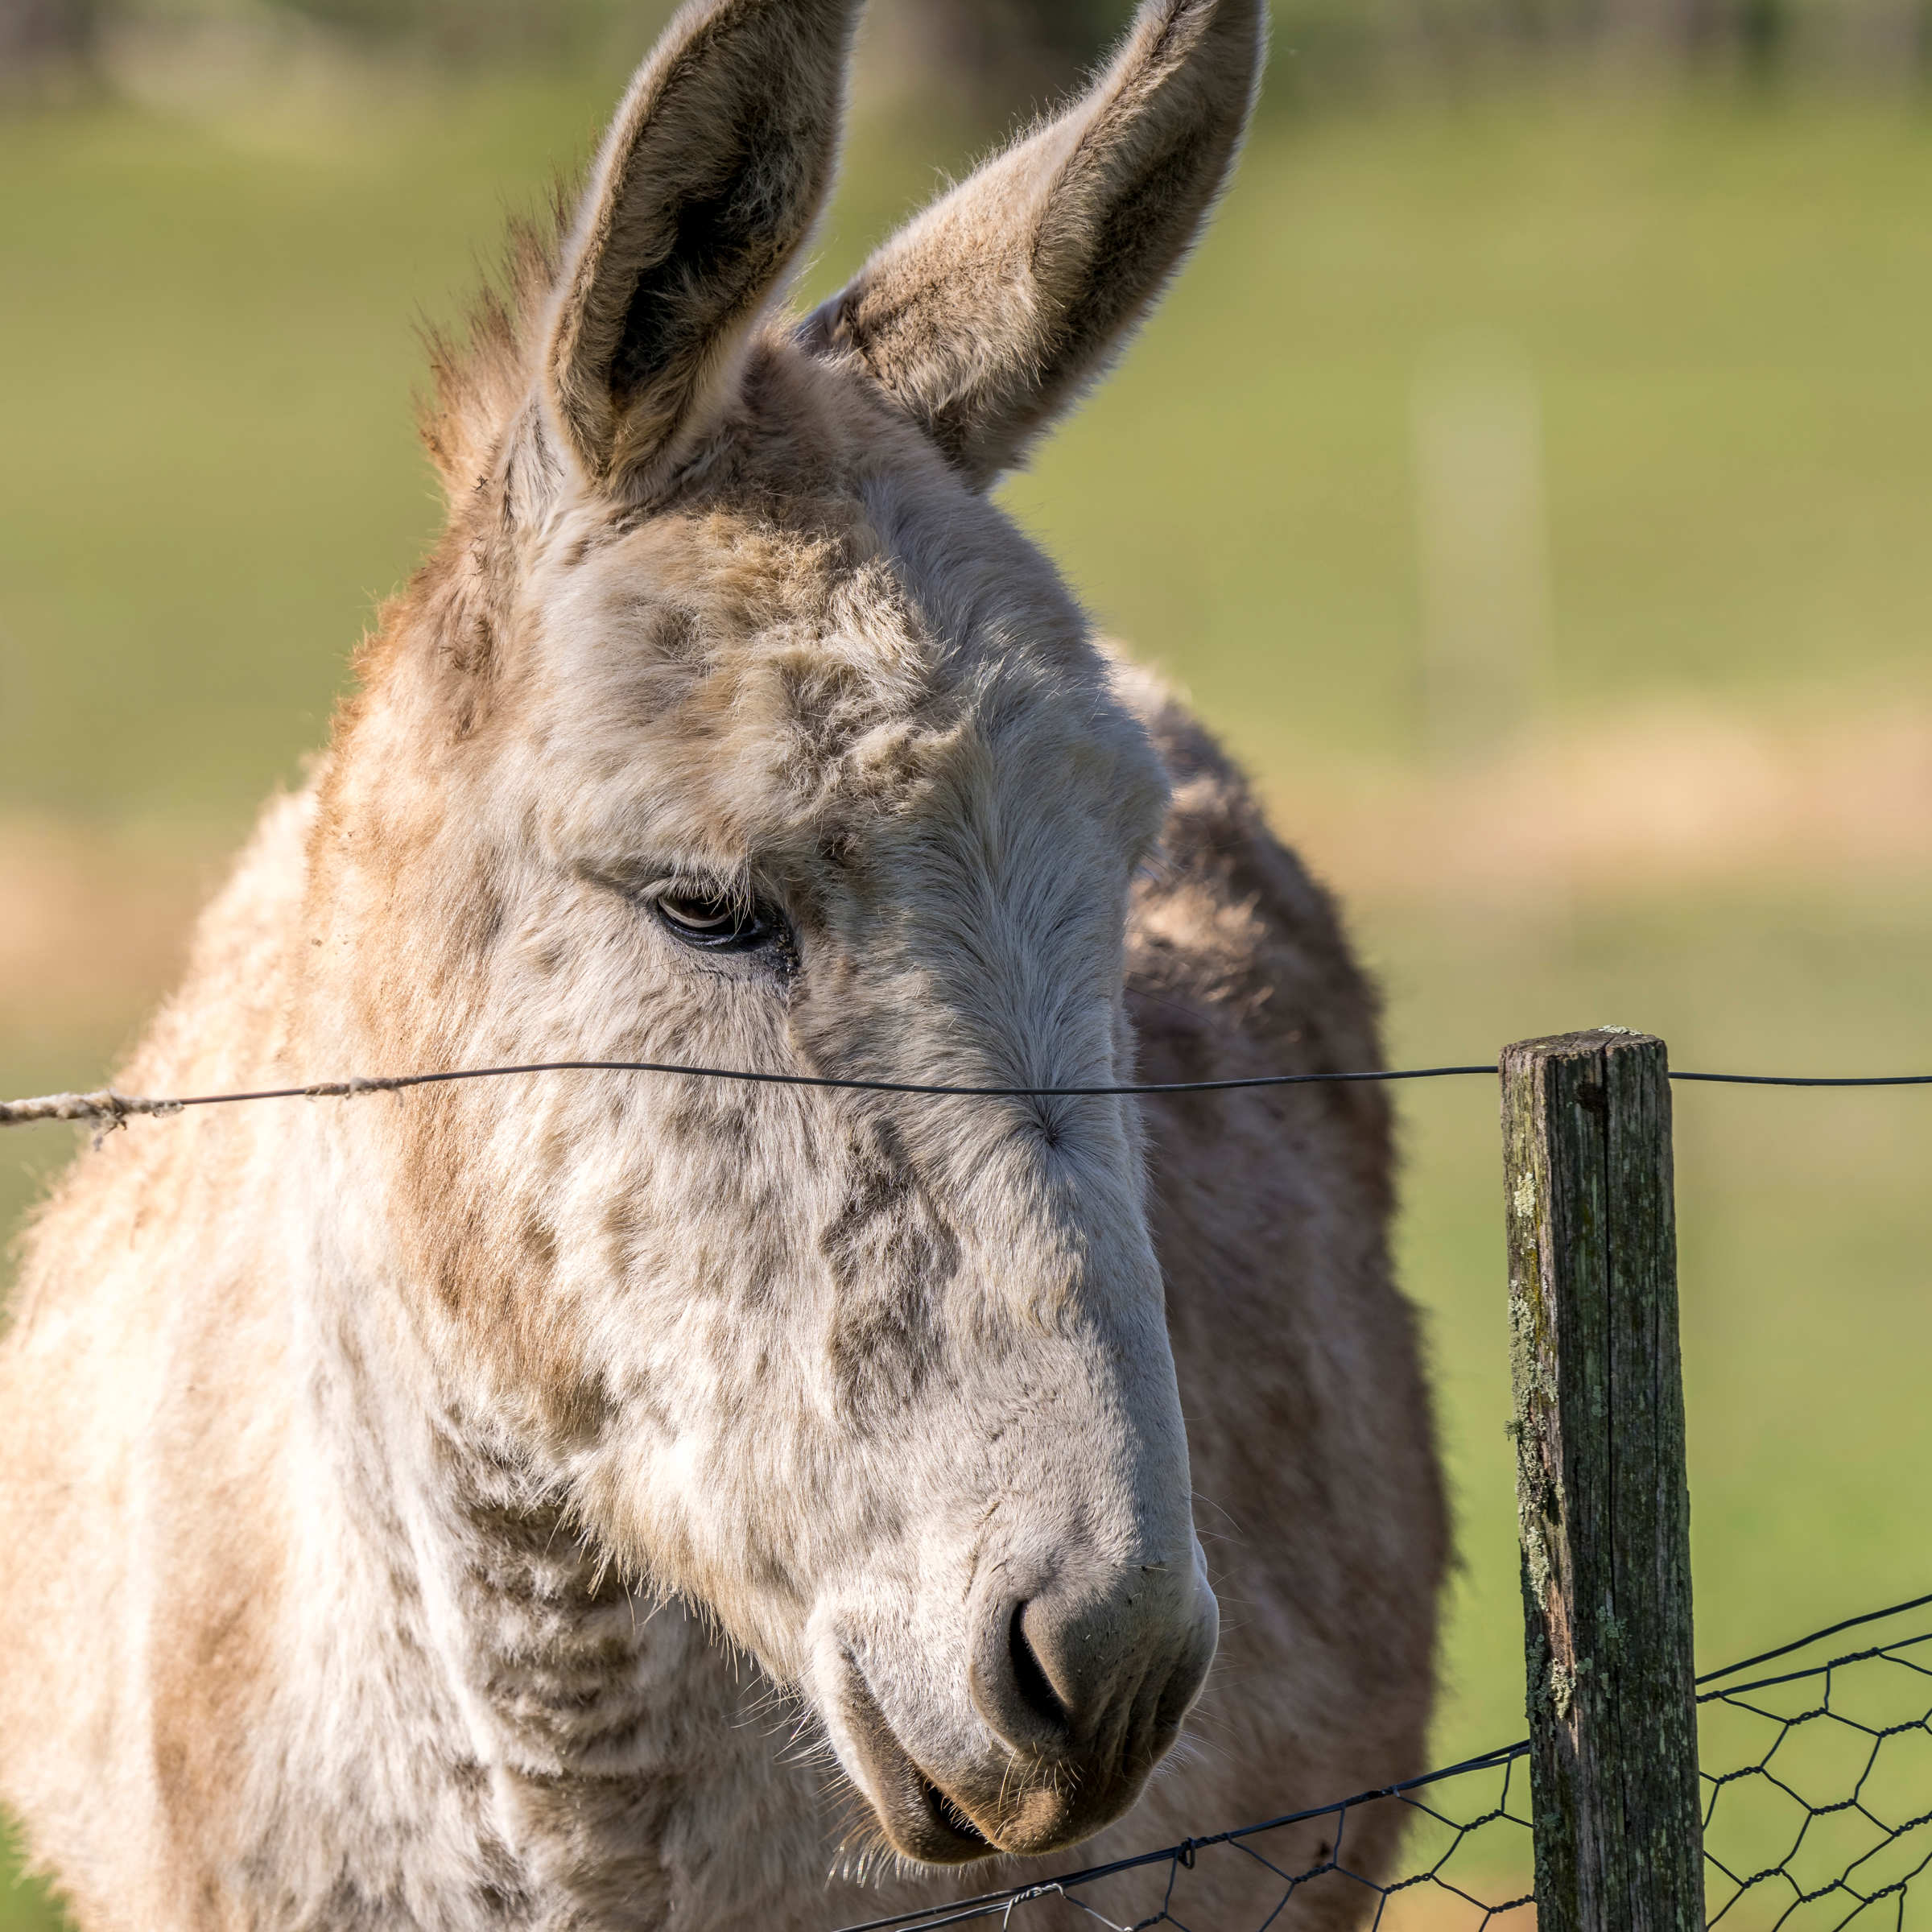 A grey donkey stands behind a wire fence and is looking into the distance with his ears erect. Photo: Rob Burnett.